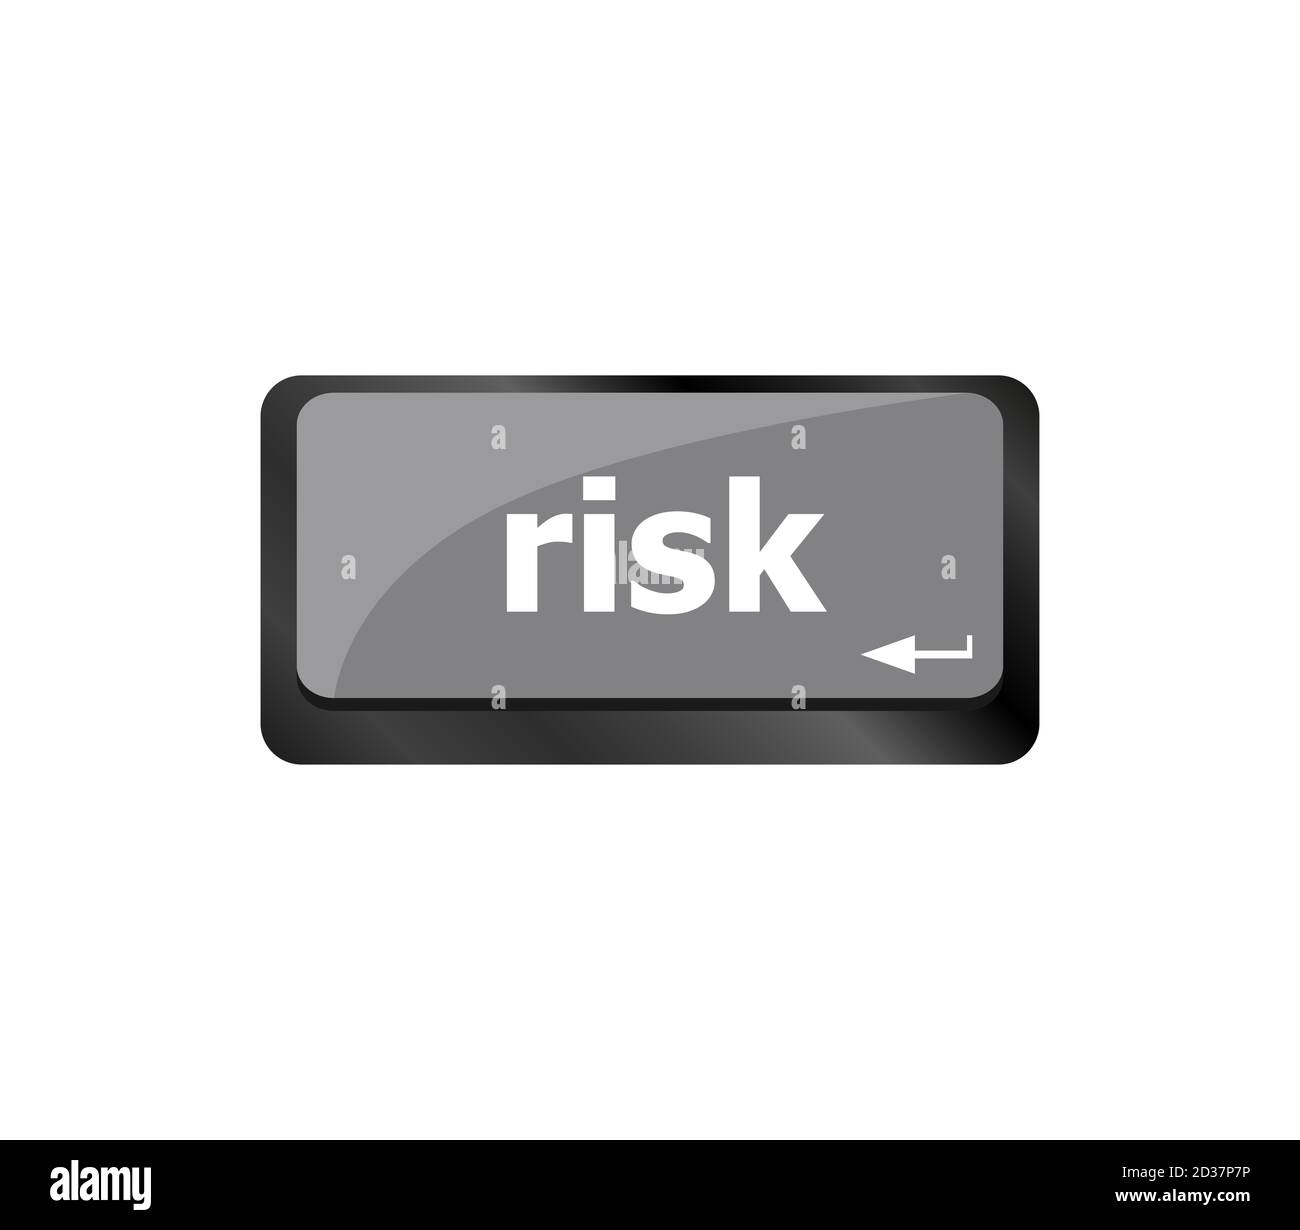 risk management keyboard key showing business insurance concept Stock Photo